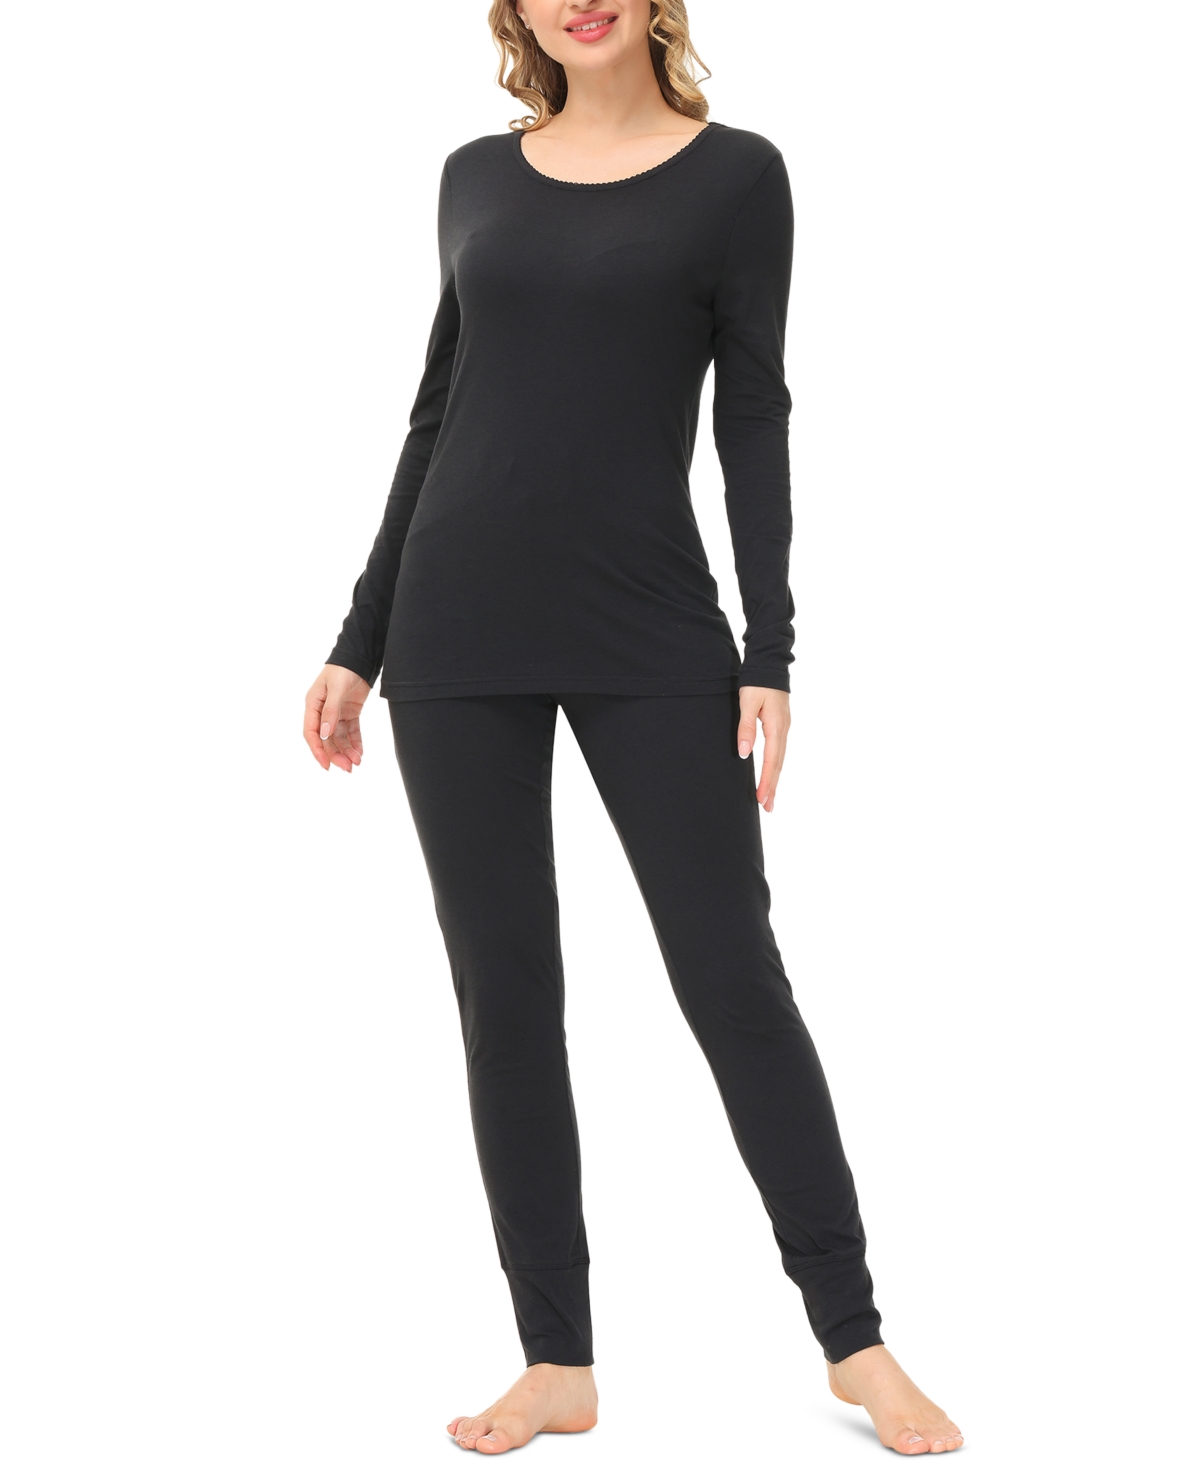 Women's Knit Long Sleeve Scoop Neck with the Legging Set - Black